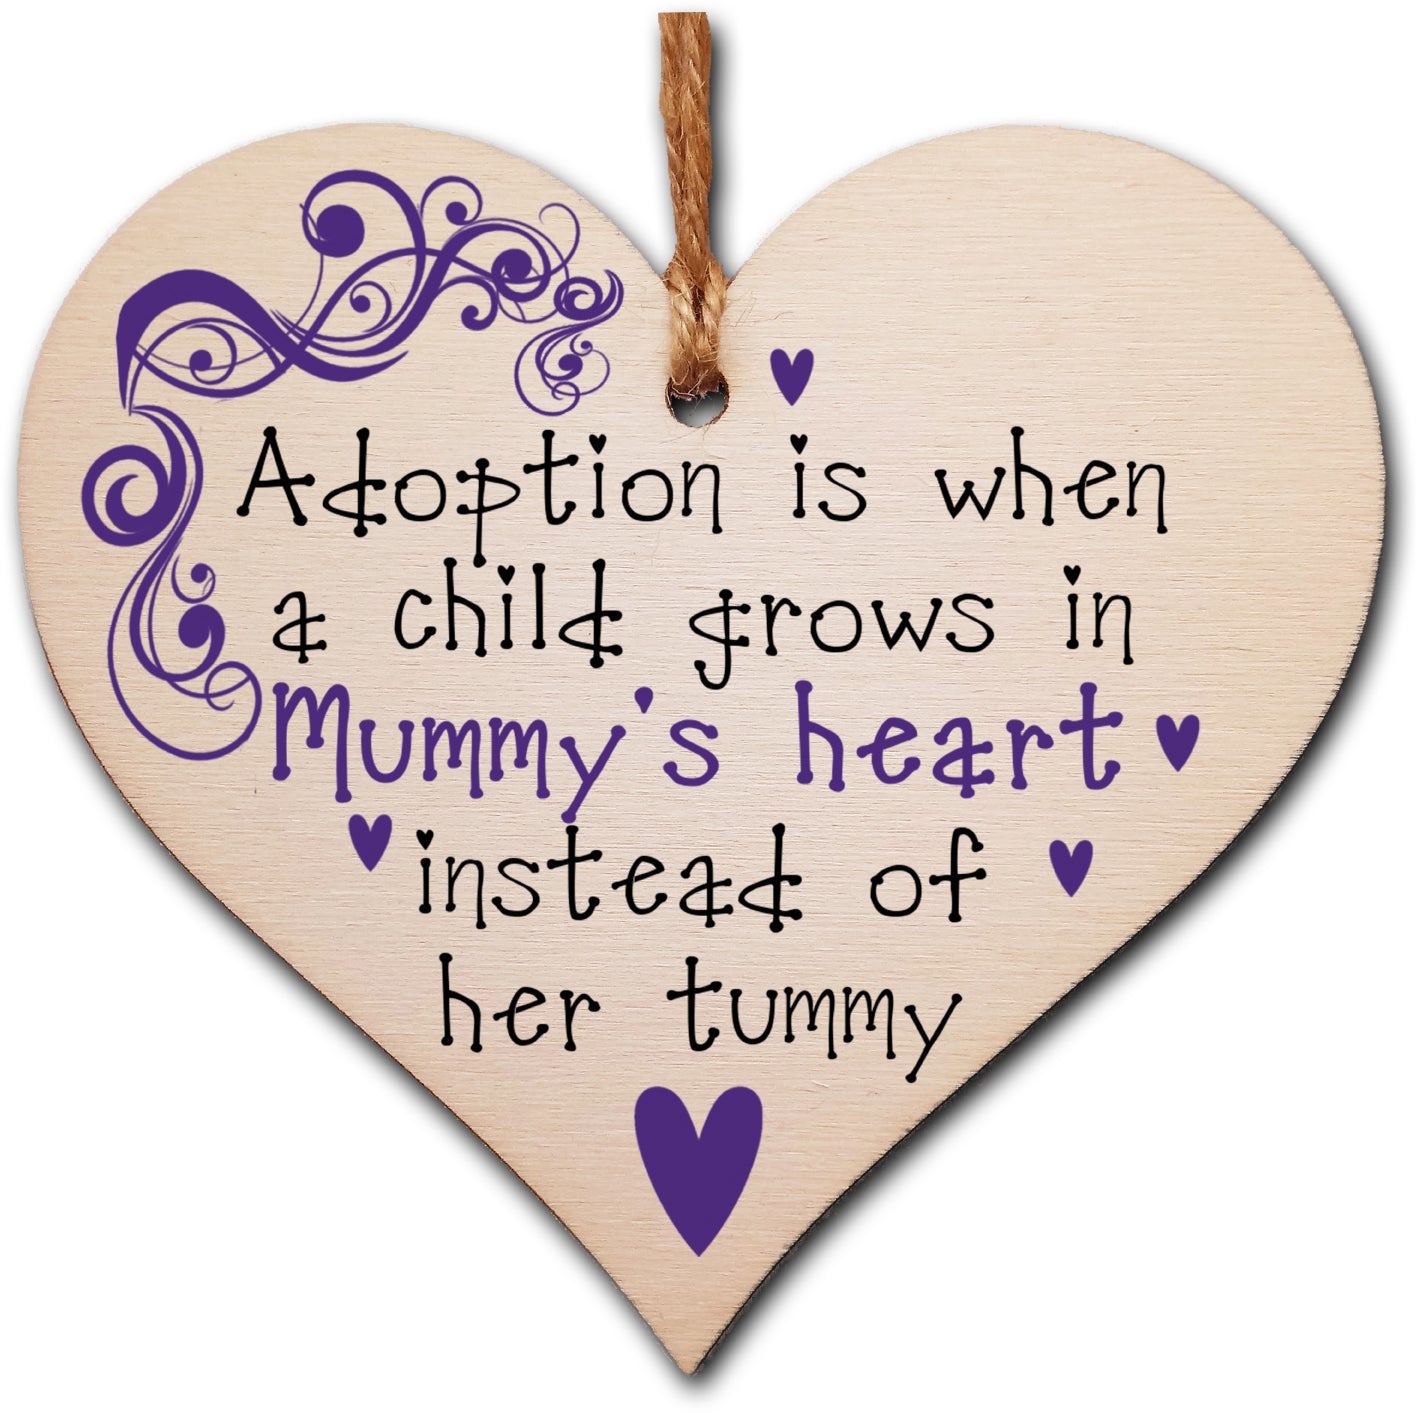 Handmade Wooden Hanging Heart Plaque Gift to Celebrate Adoption